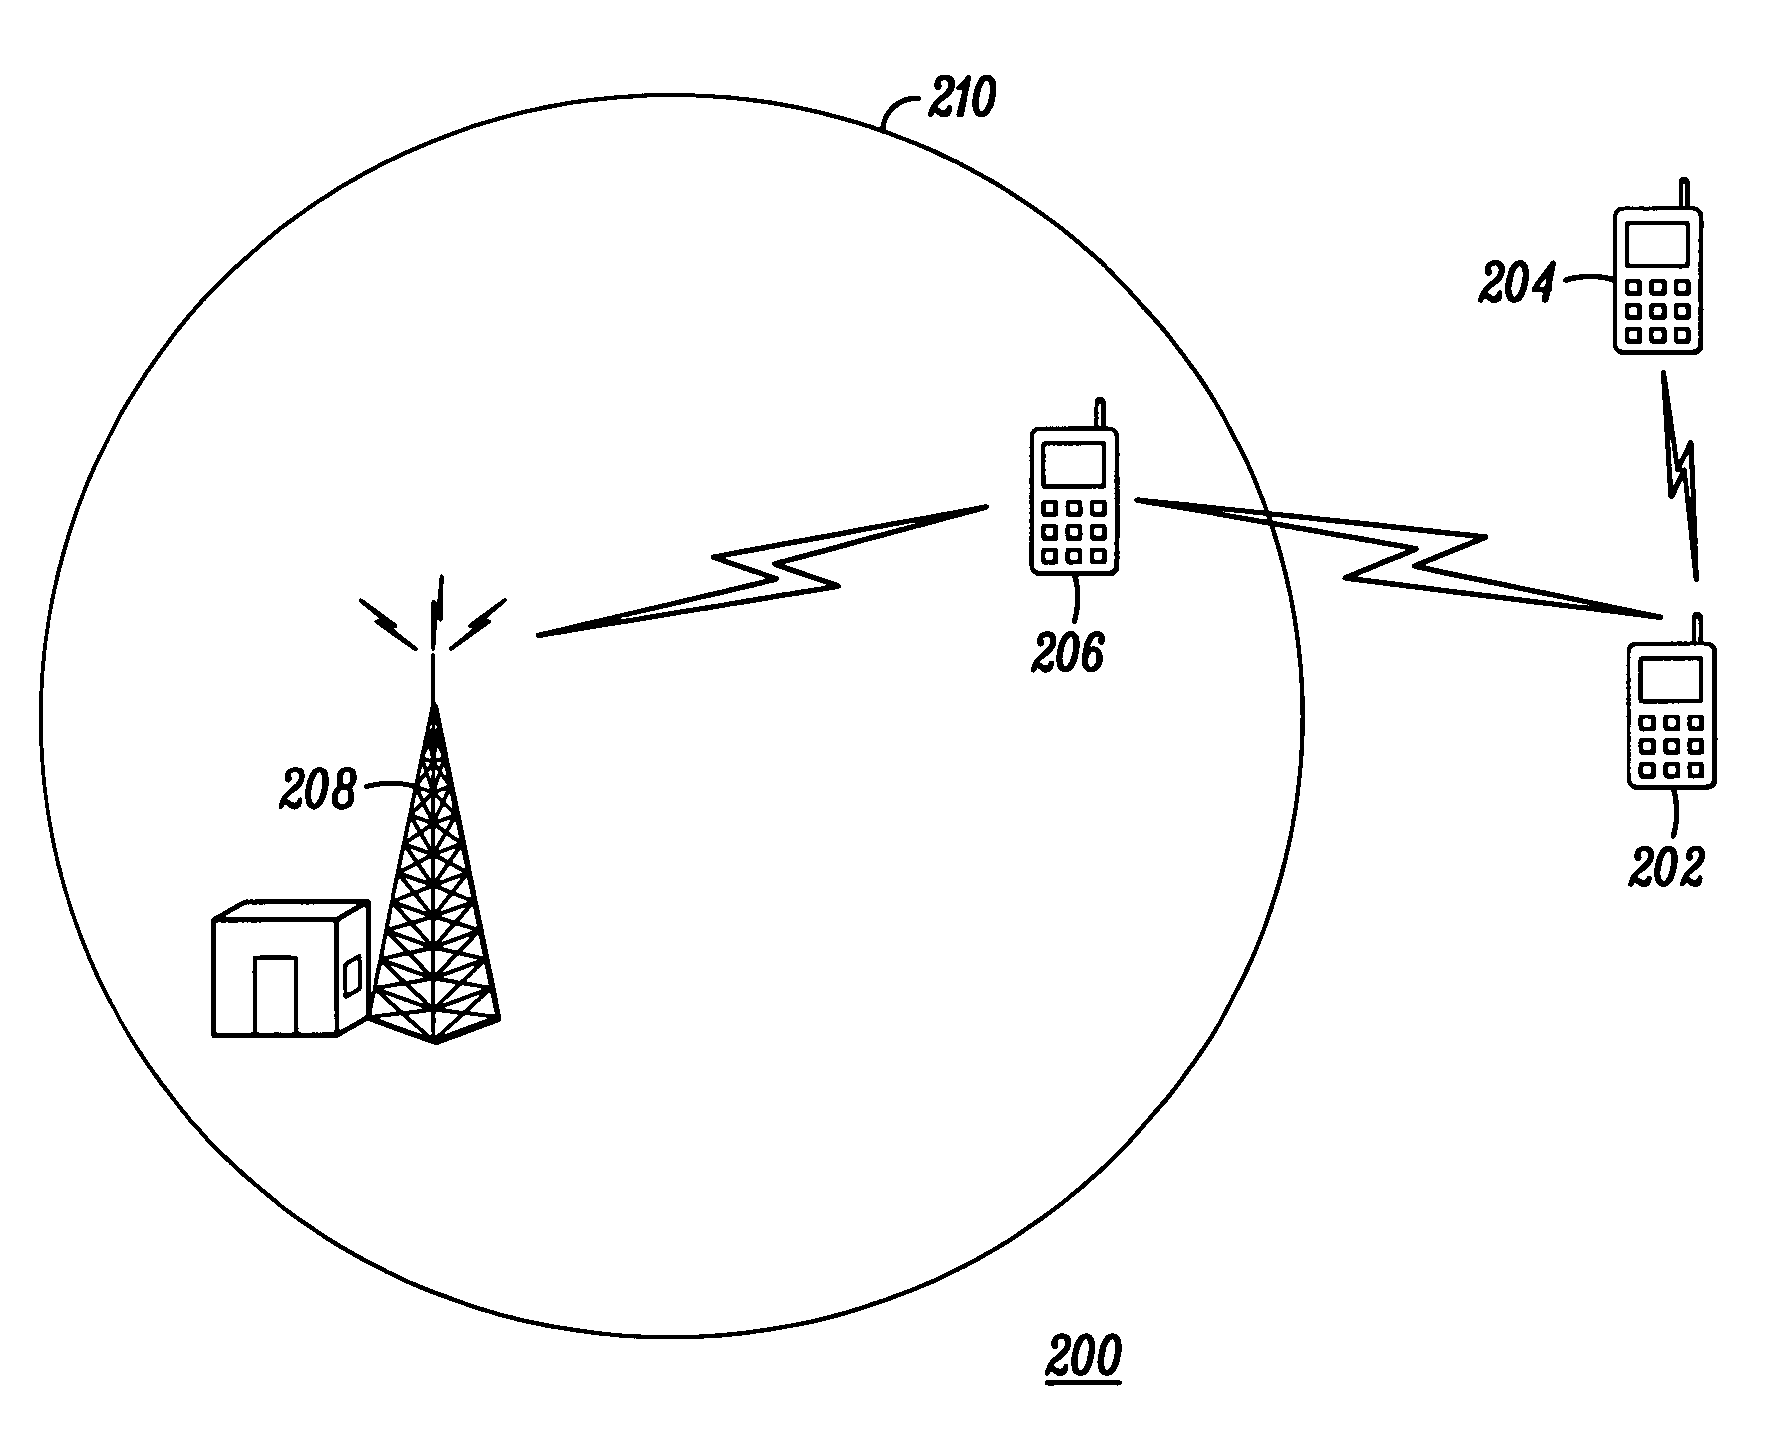 Method for providing location aiding among peers operating in a direct communication mode